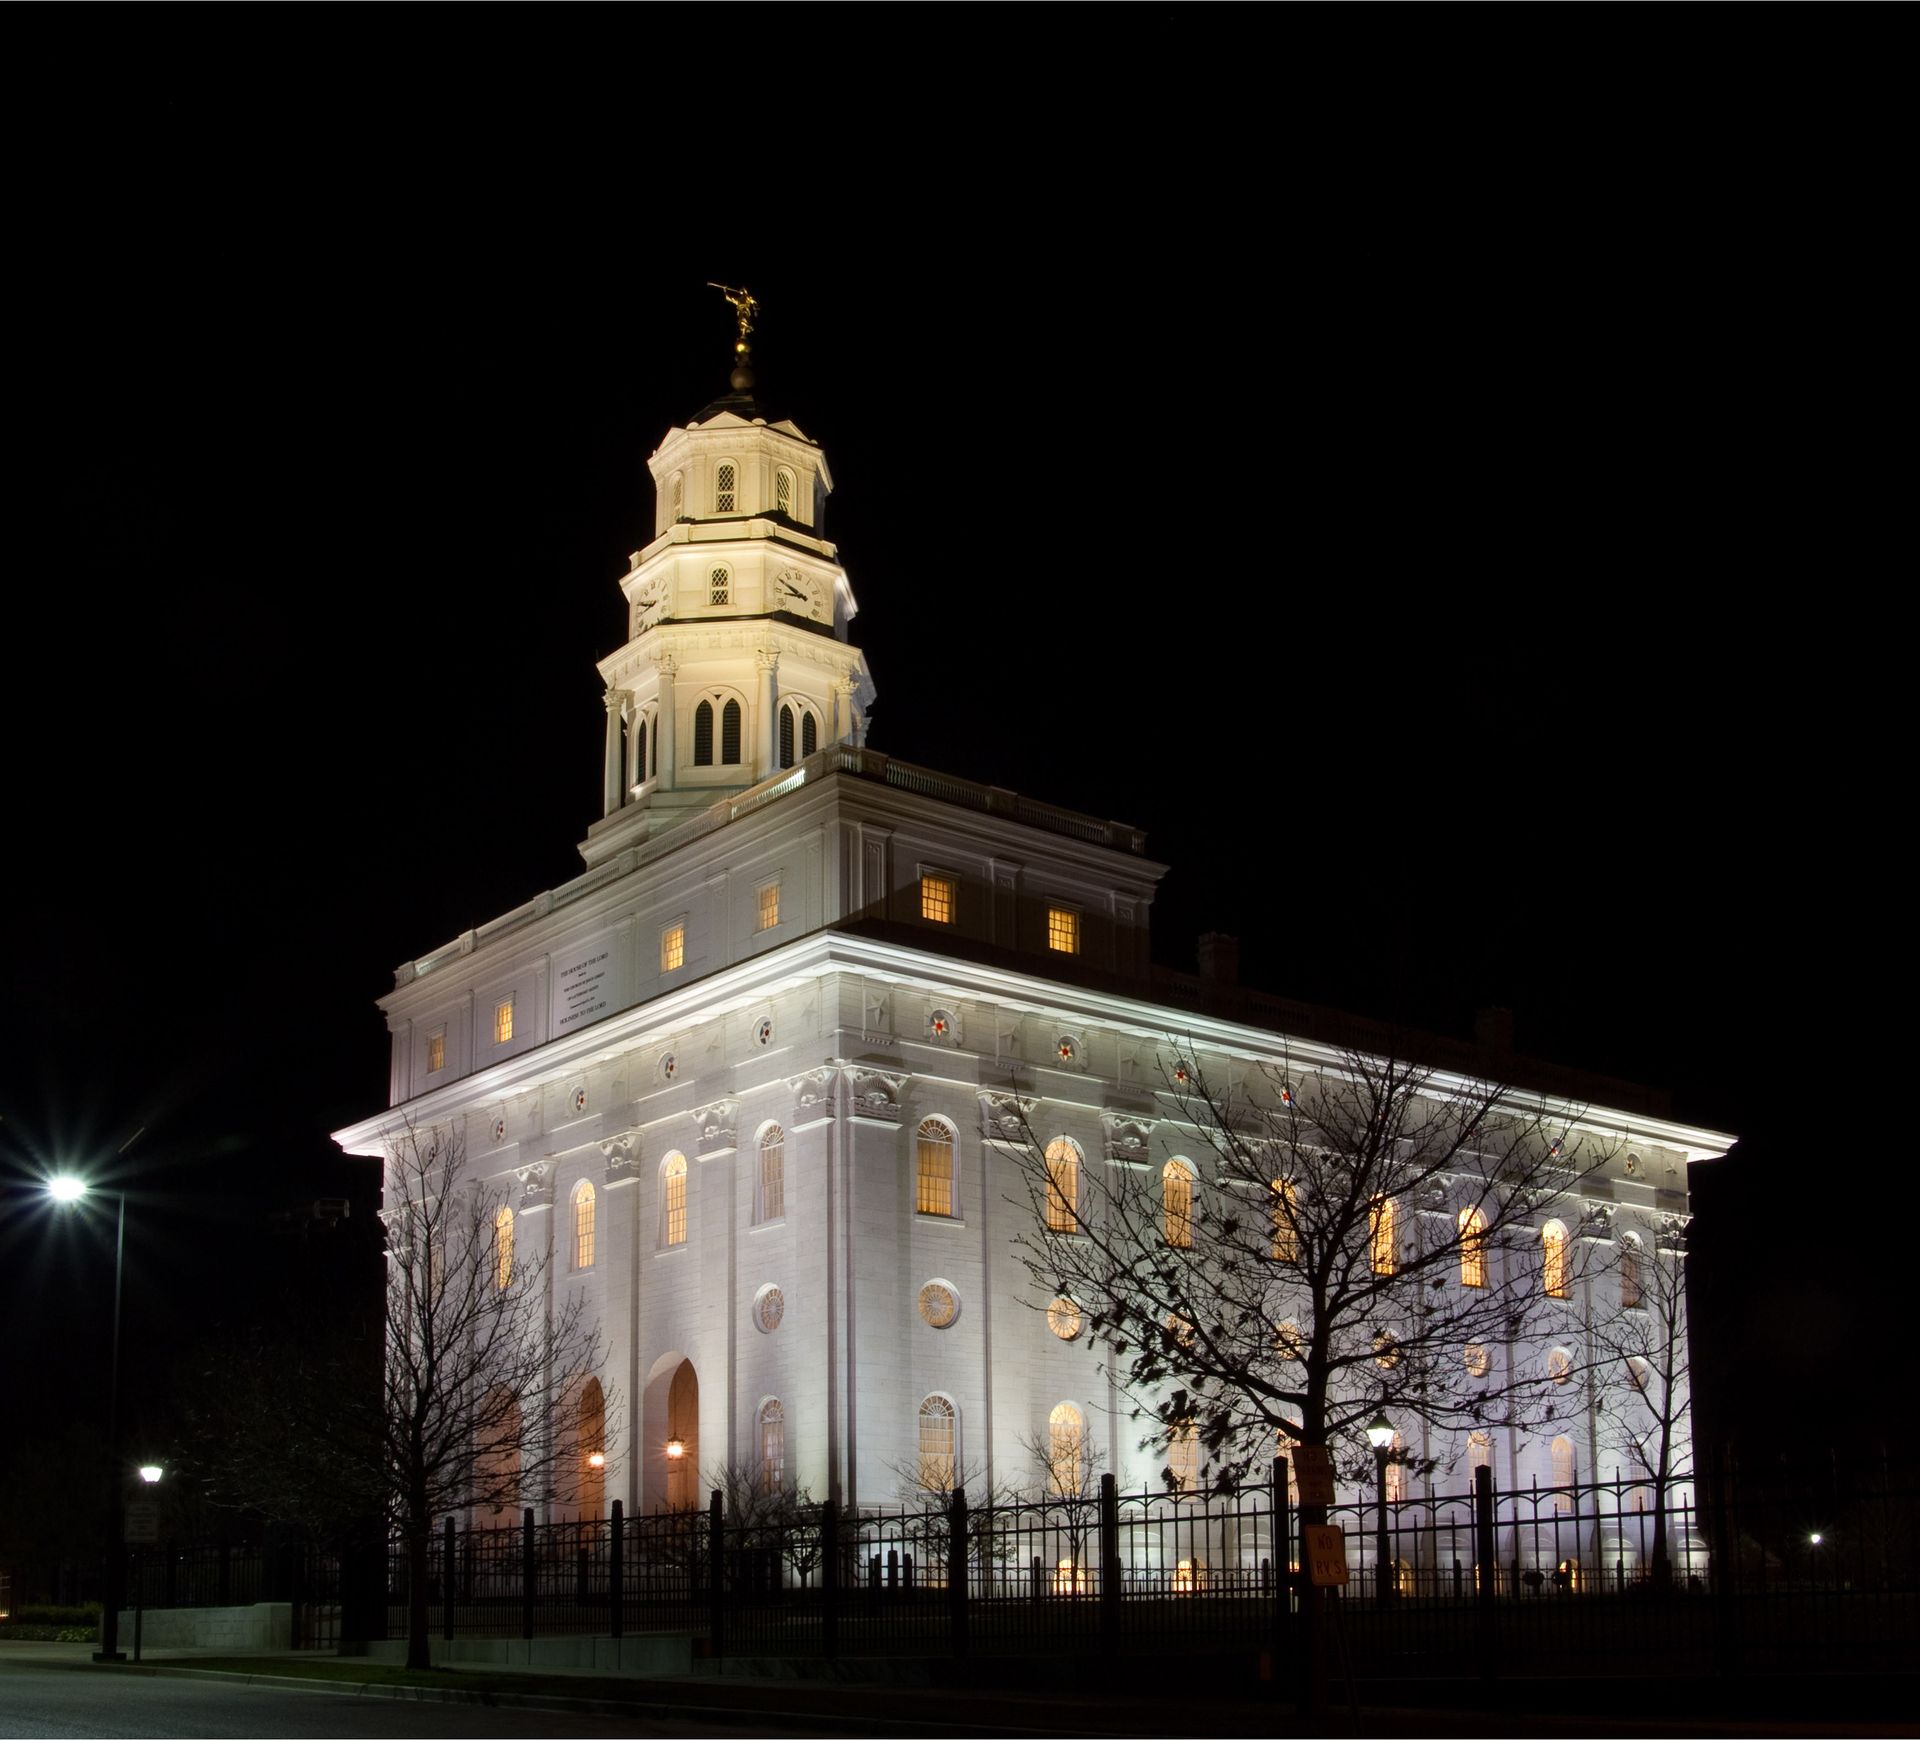 The Nauvoo Illinois Temple in the evening, including scenery.